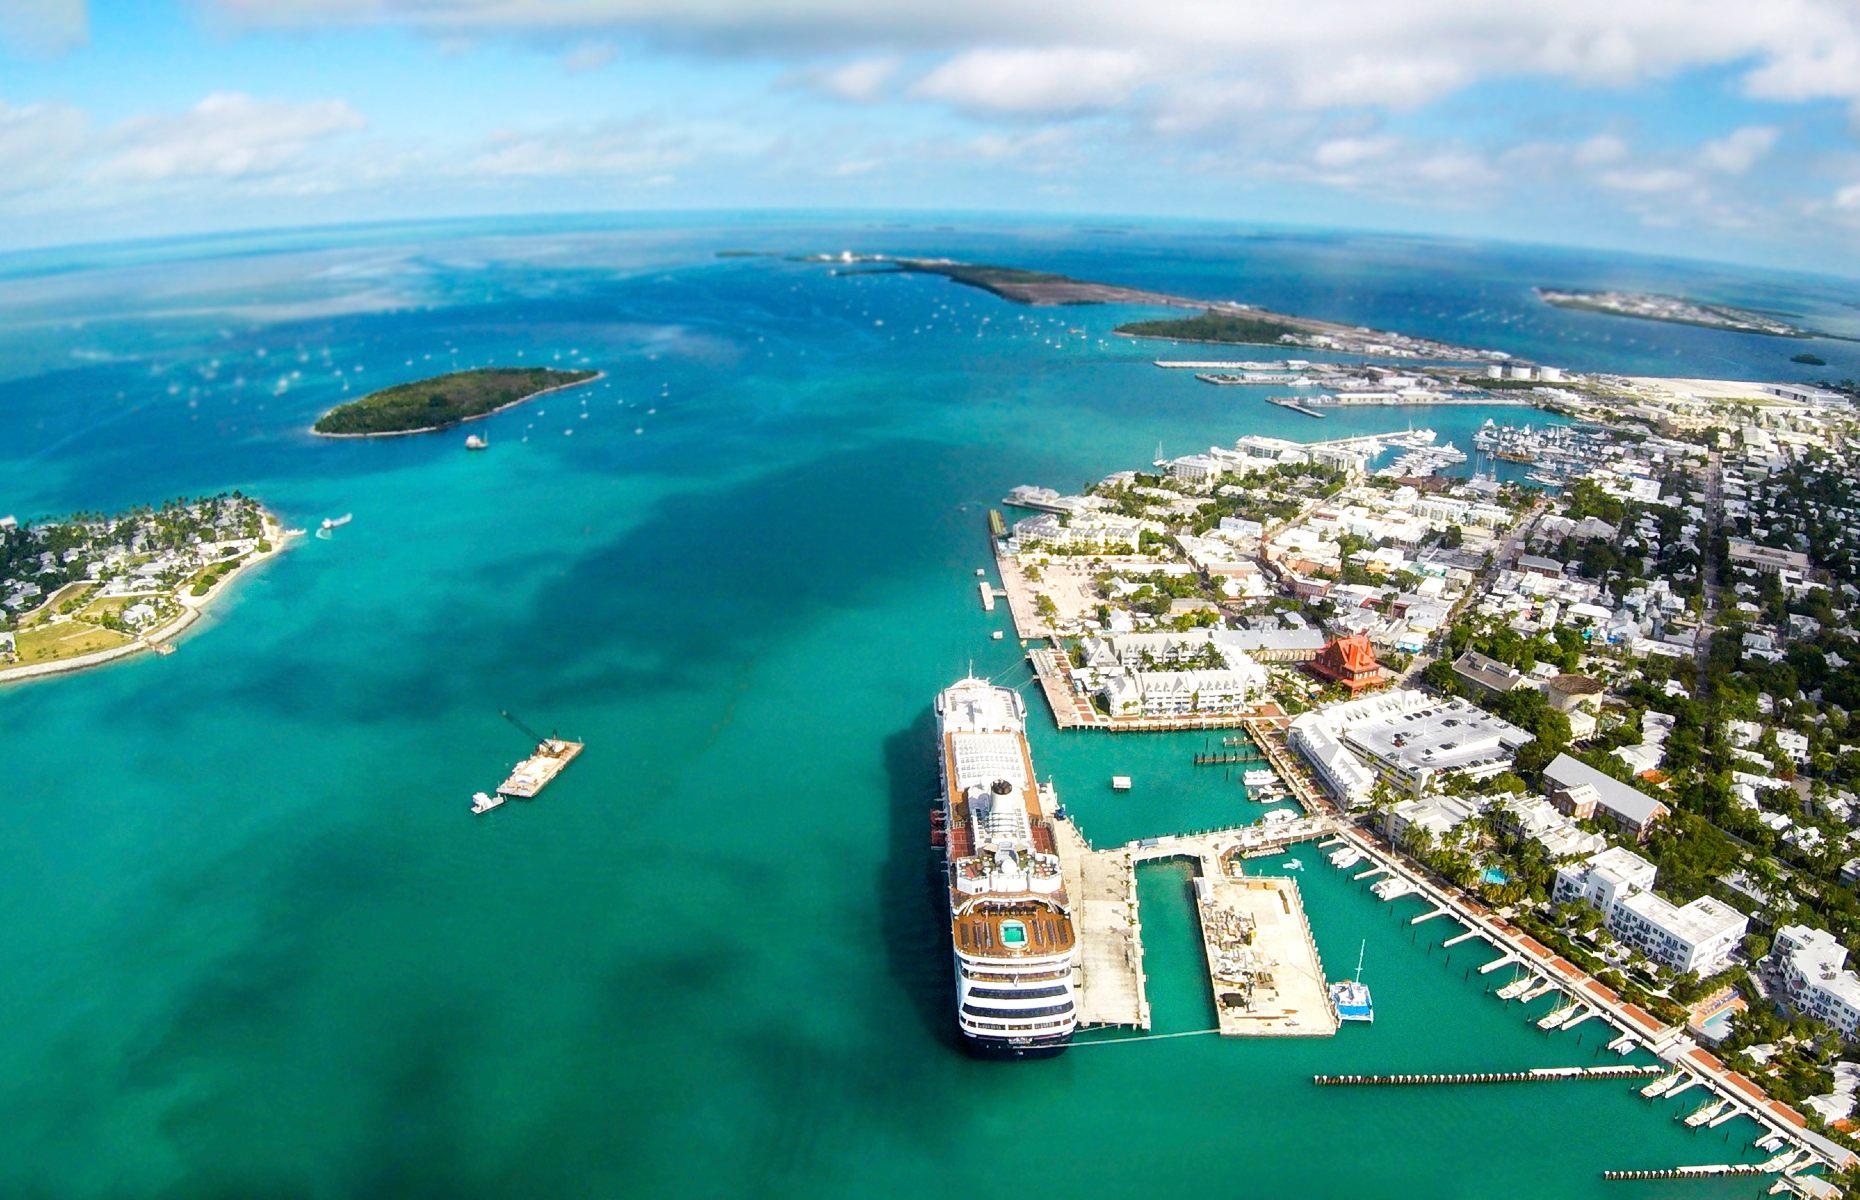 <p>Packed with culture, history and world-class diving and fishing spots, it’s easy to see why Key West is the most famous island of the <a href="https://www.loveexploring.com/guides/73827/explore-the-florida-keys-where-to-stay-what-to-eat-the-top-things-to-do">Florida Keys</a>. As the state's southernmost point, the island feels like its own little world where Caribbean-style pastel-hued villages serve as adorable B&Bs and impossibly clear waters are bordered by pretty palm-fringed shores. Writers have always loved the Keys, the island’s tin roof houses were once home to the likes of Ernest Hemingway and Tennessee Williams. Hemingway Home & Museum, where the famous author lived for more than 10 years, has become a major tourist hot spot.</p>